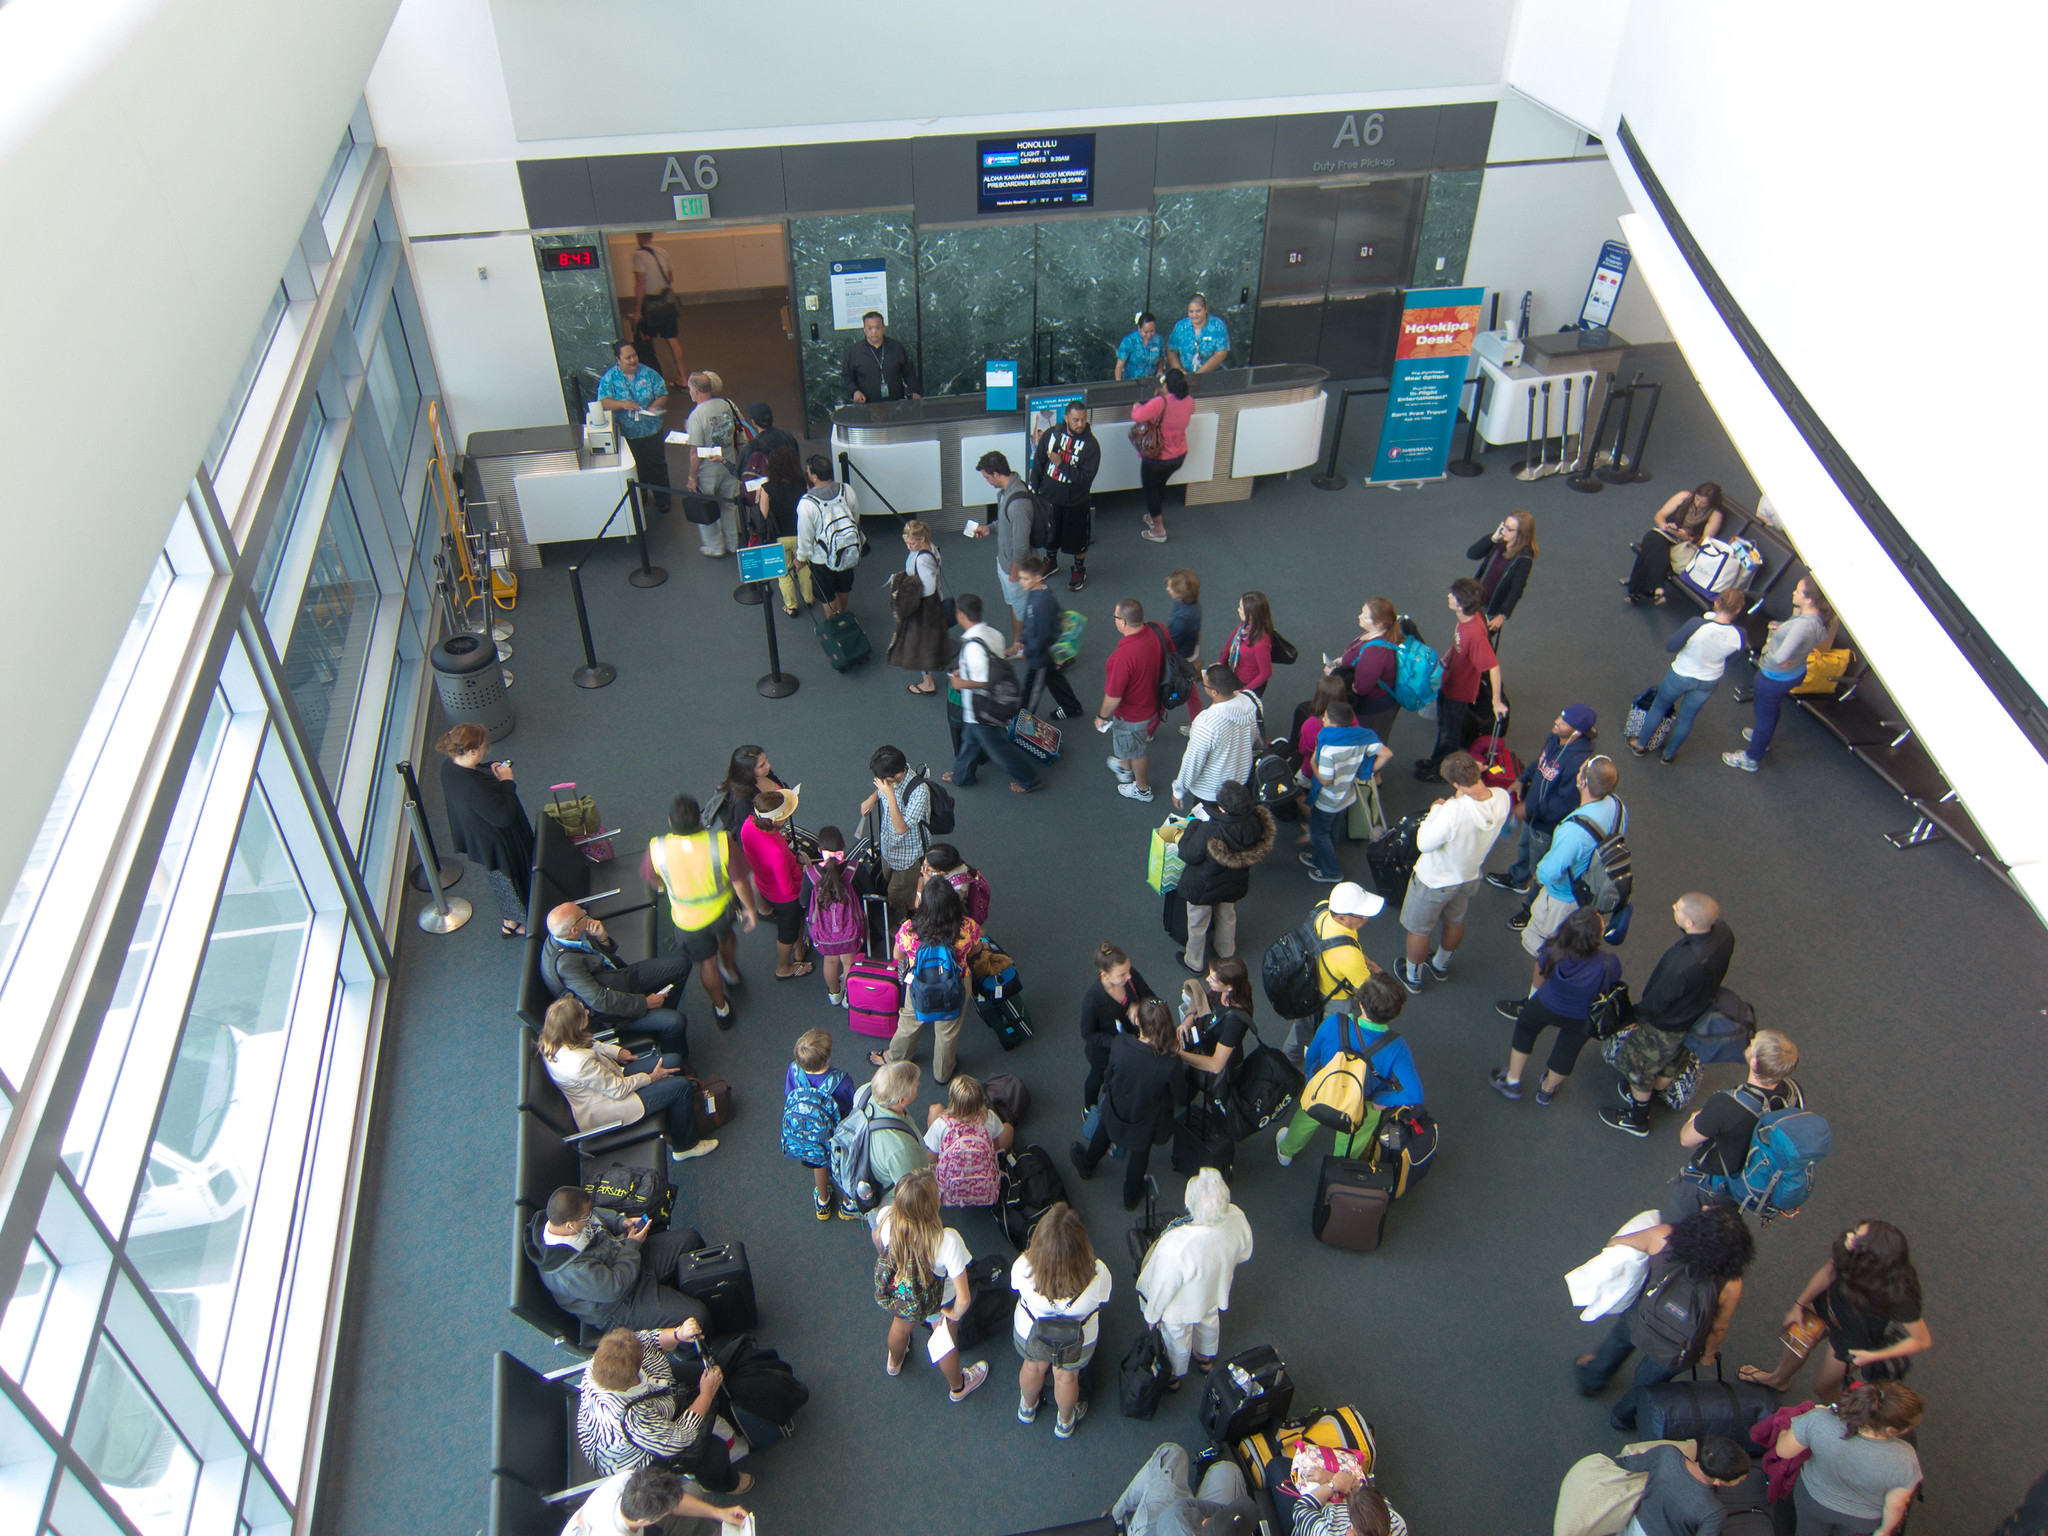 Airport passengers congregating in front of a gatehouse desk and jetbridge entrance.